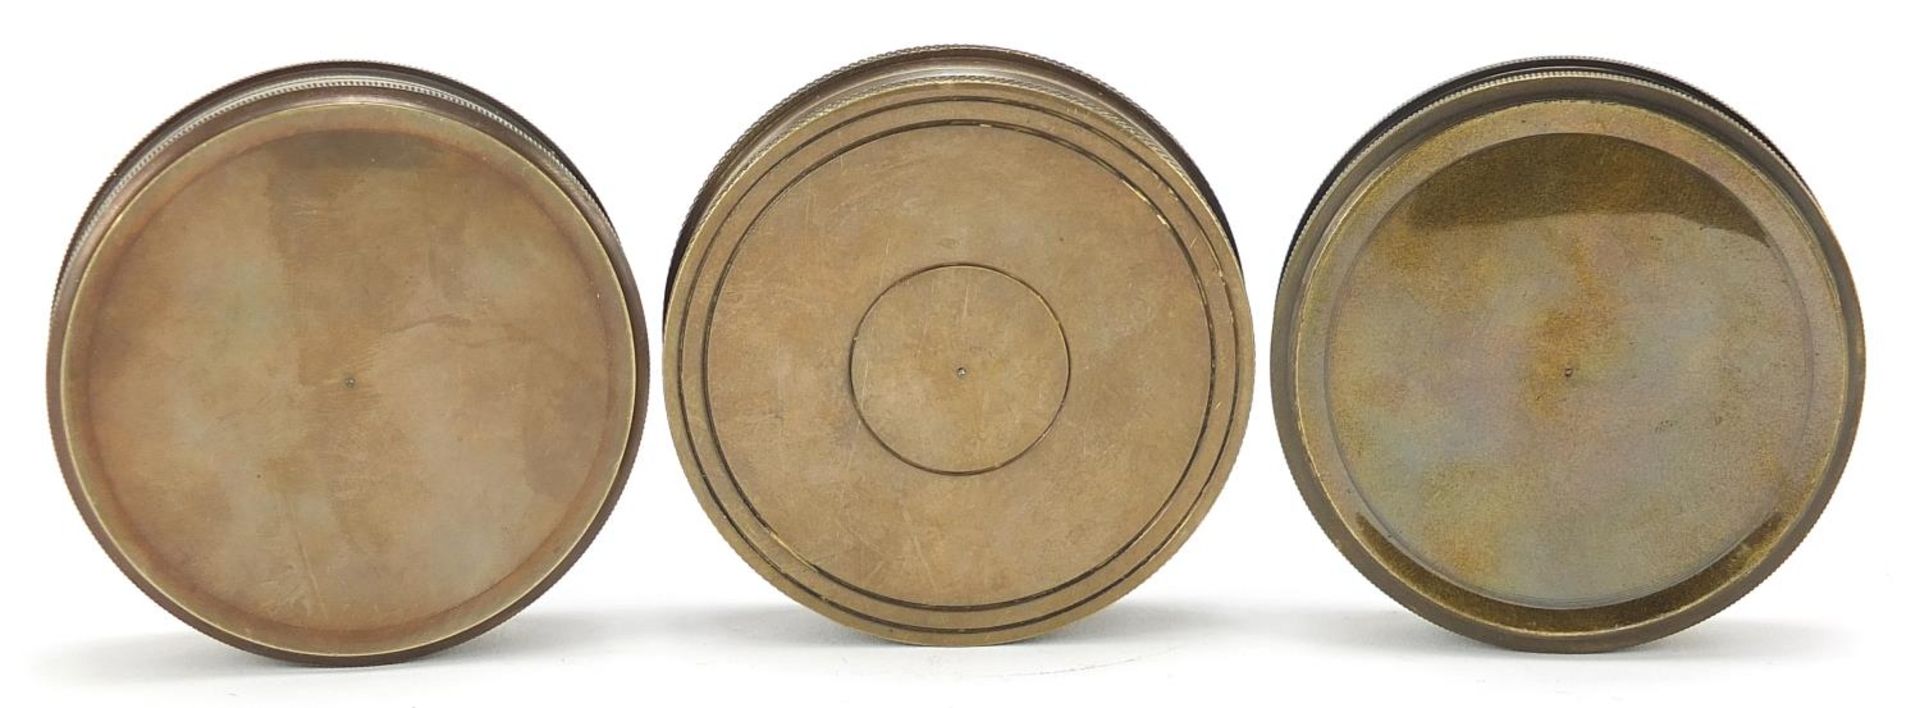 Three naval interest brass compasses including two German style examples, each 7.5cm in diameter - Image 4 of 4